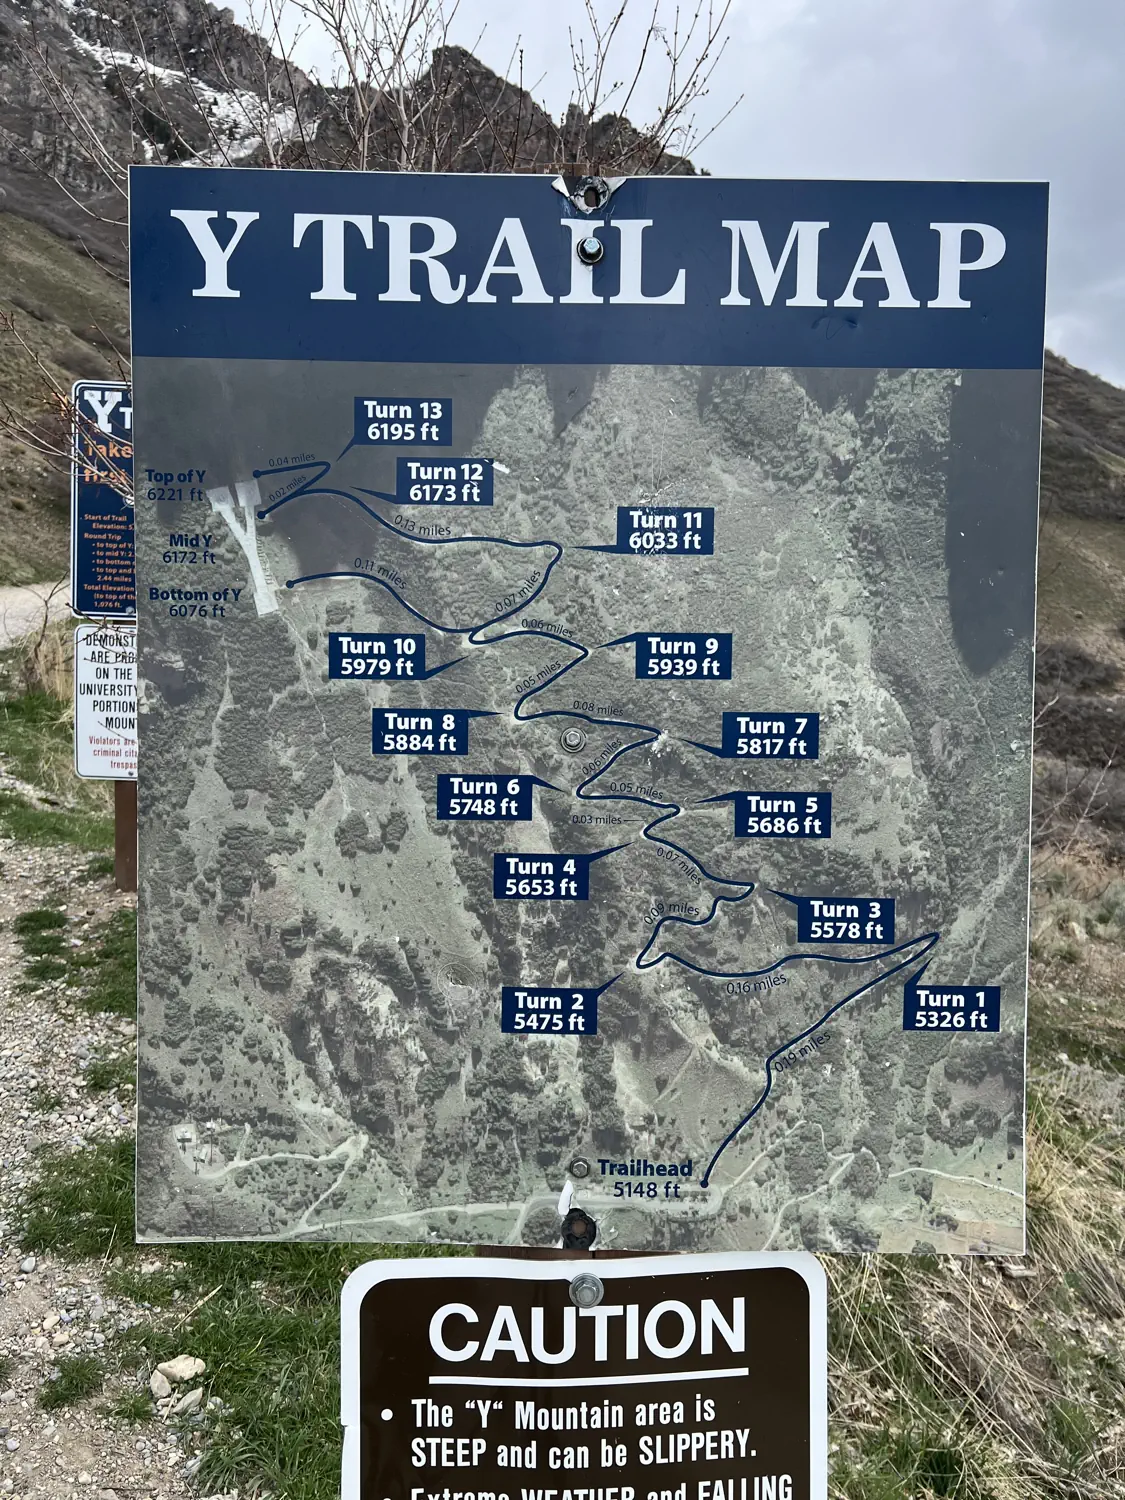 Map of the switchbacks for the Top of the "Y" Trail